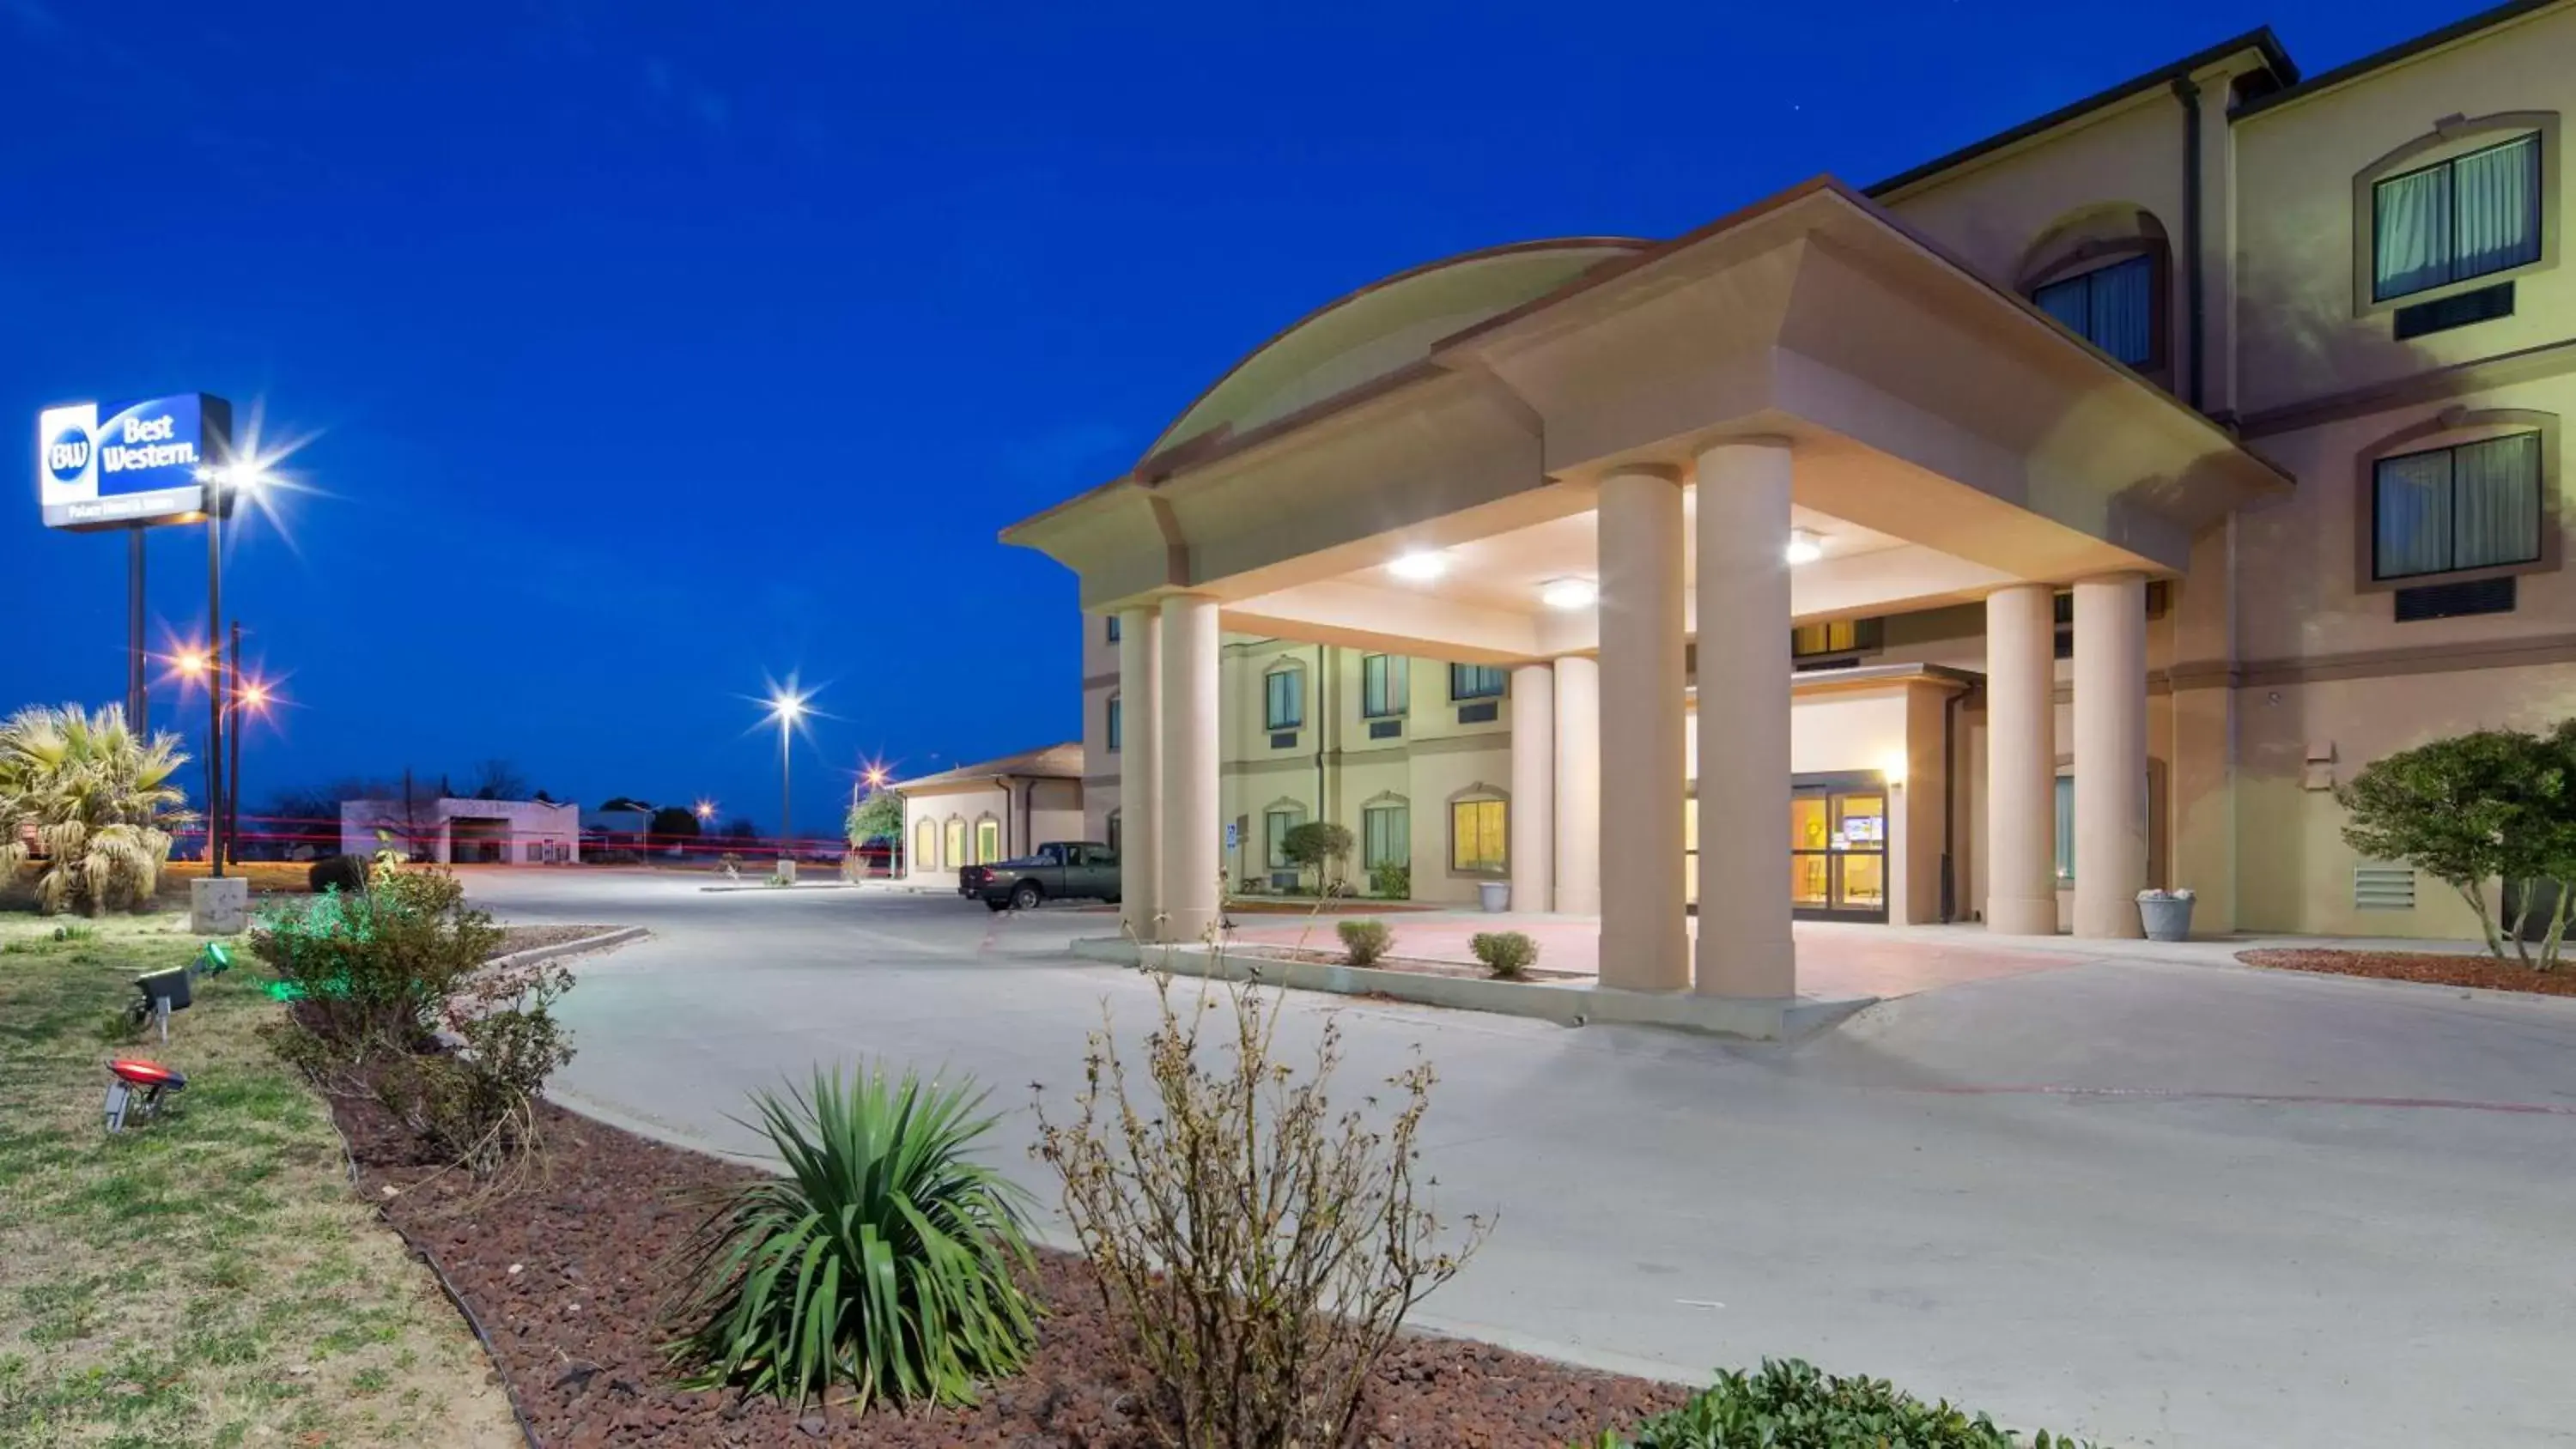 Property building in Best Western Palace Inn & Suites